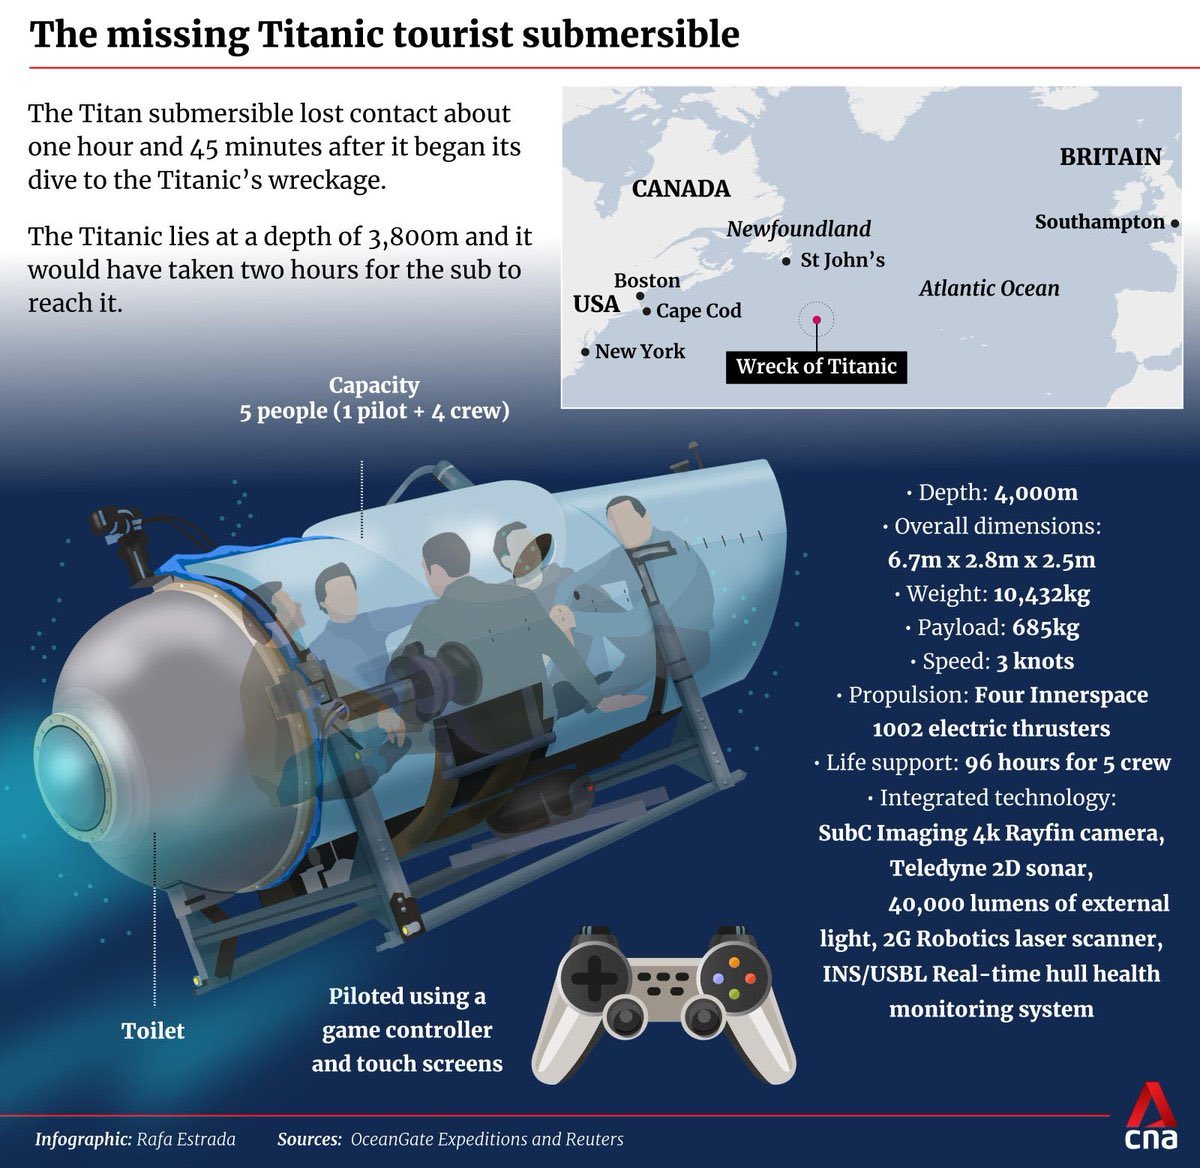 I appreciate that whoever did this infographic took the time to label the toilet. 🤦‍♂️

This whole thing is surreal. 

Here’s hoping that there’s still hope. 

#Titanic
#TitanicRescue